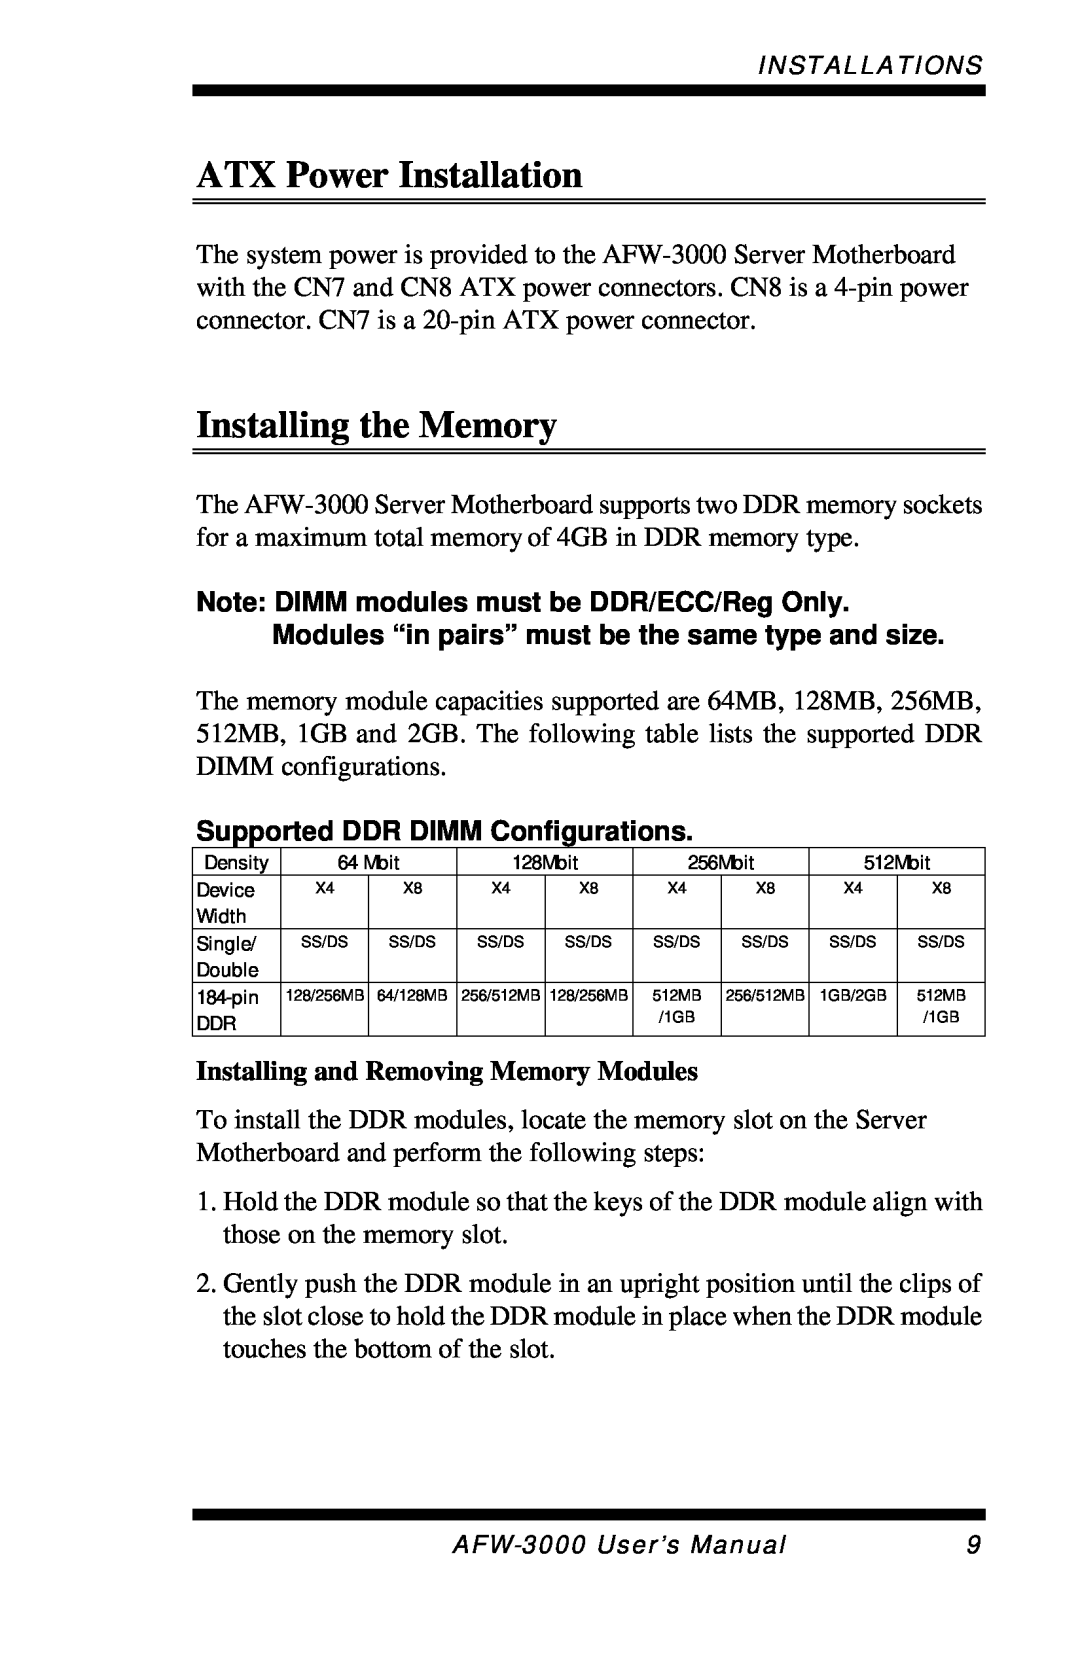 Intel E7501 user manual ATX Power Installation, Installing the Memory, Supported DDR DIMM Configurations 